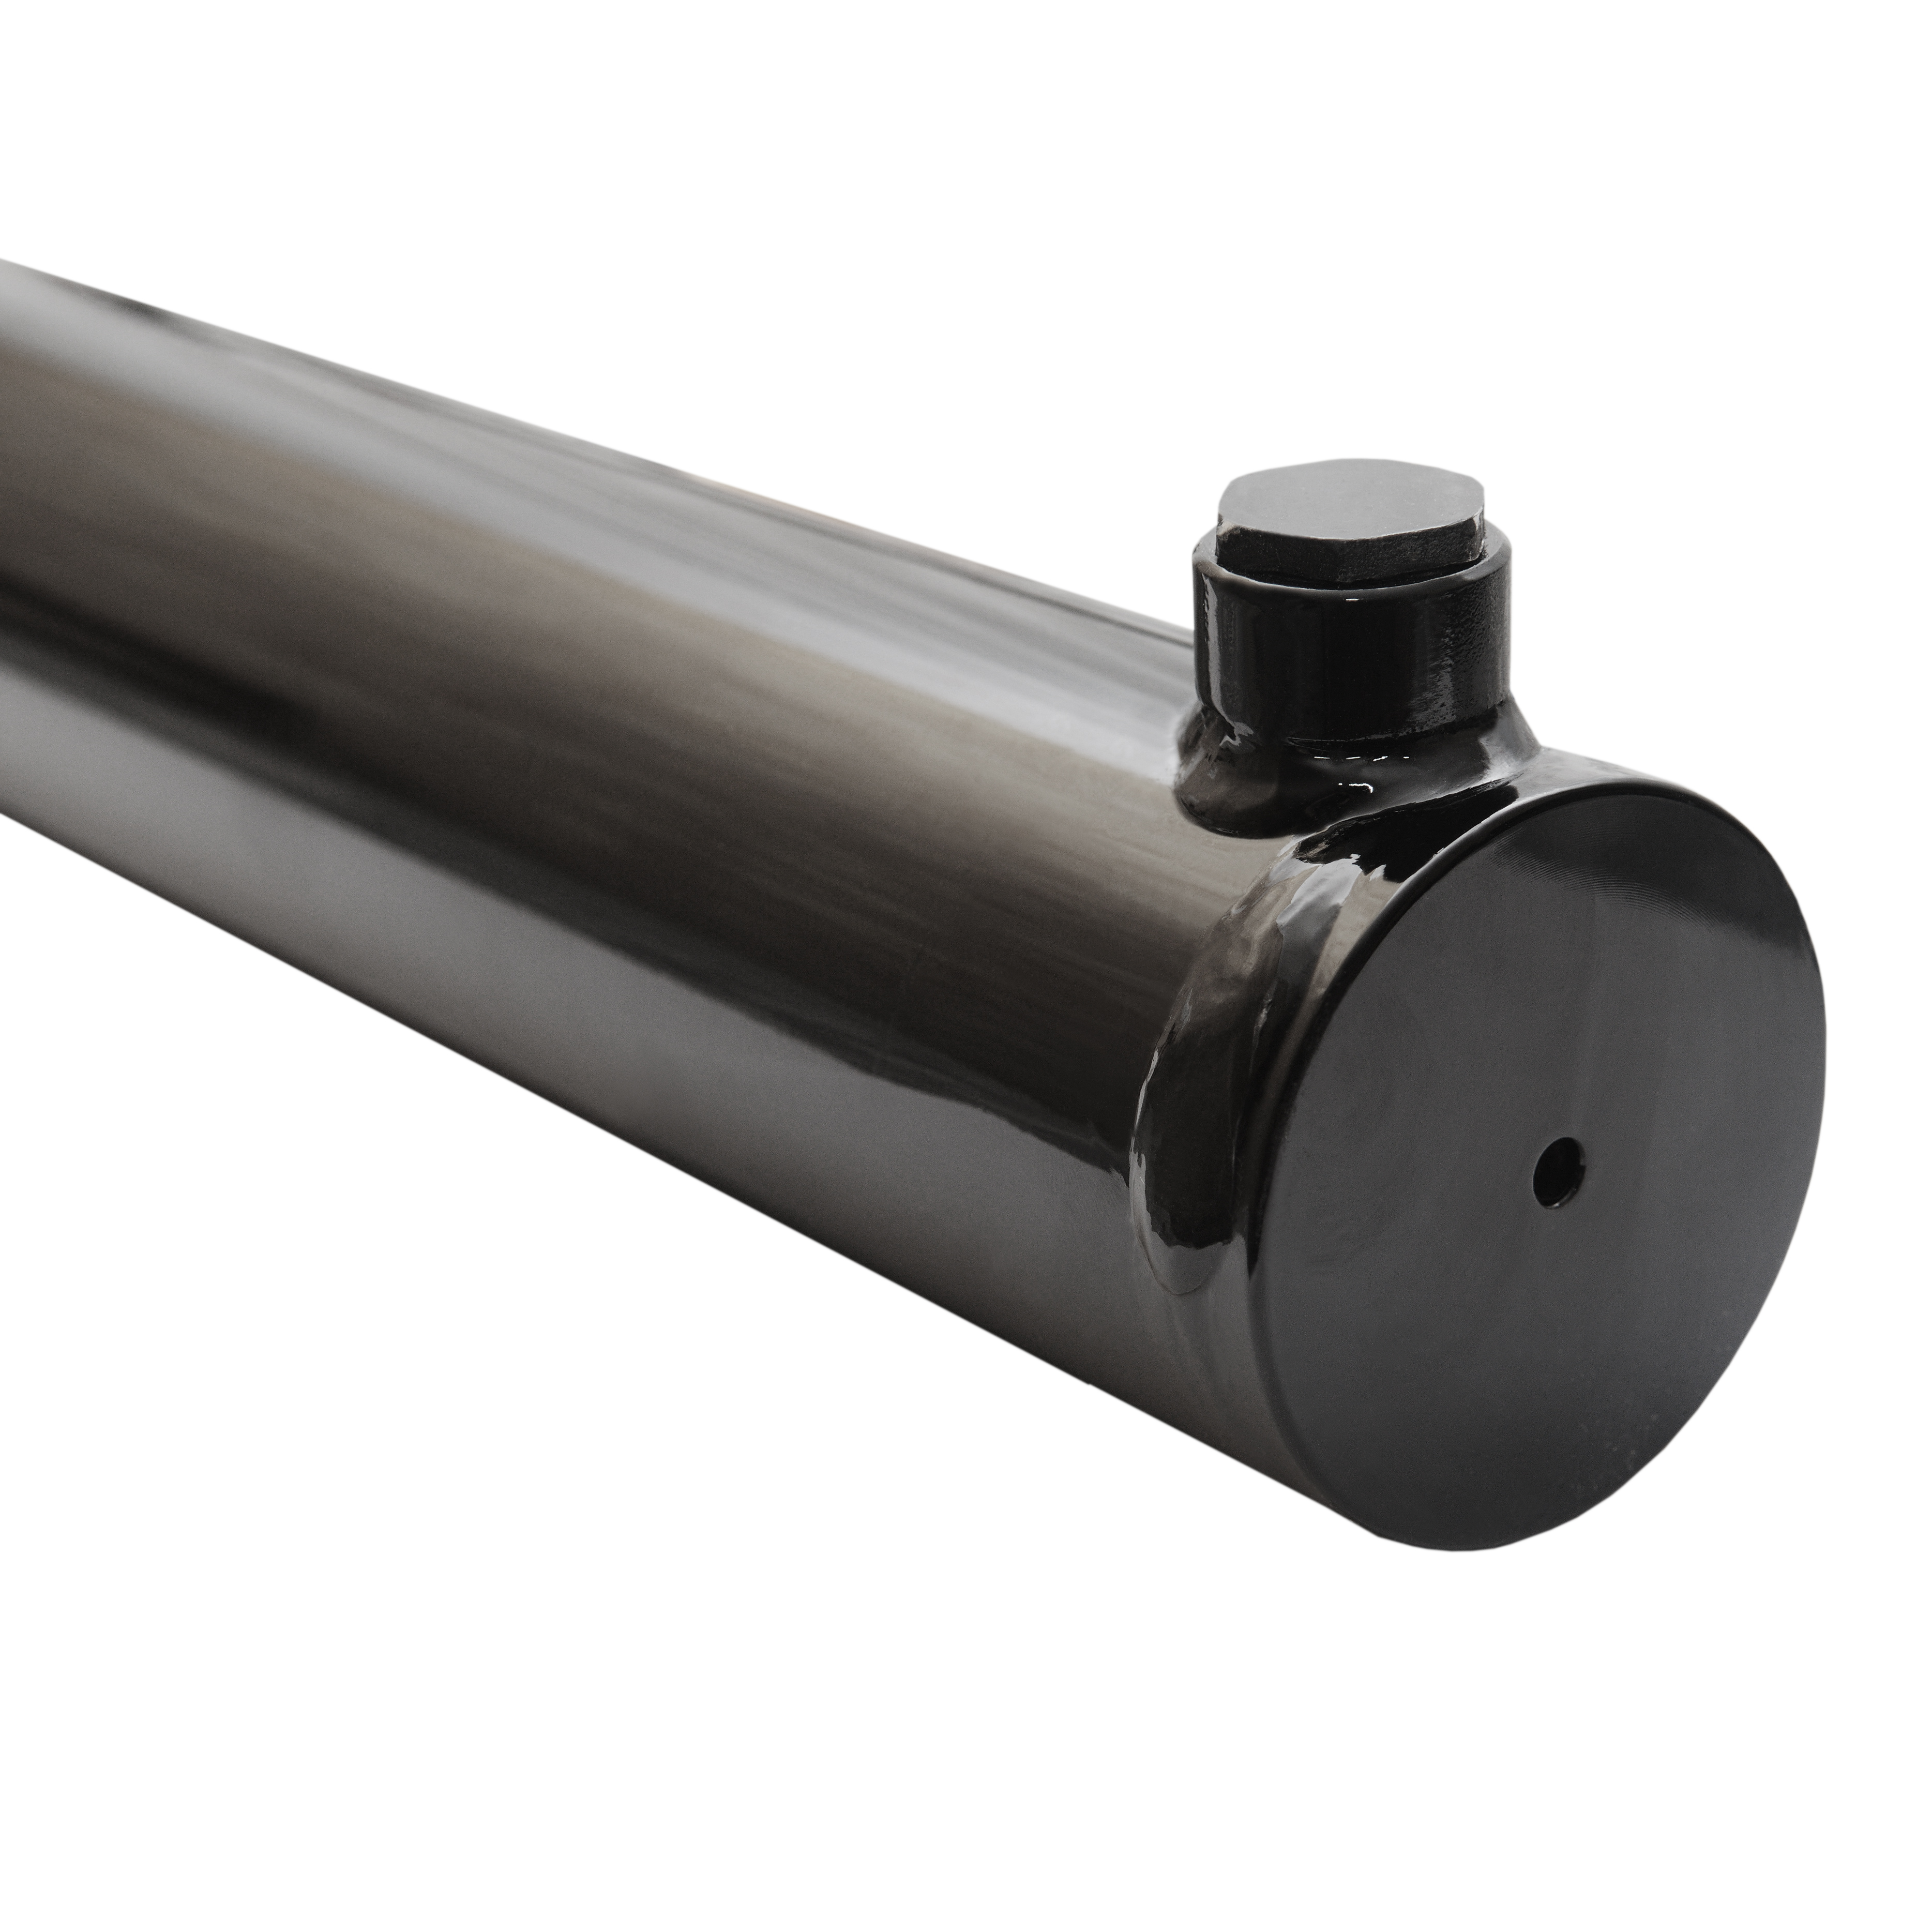 2.5 bore x 14 stroke hydraulic cylinder, welded universal double acting cylinder | Magister Hydraulics